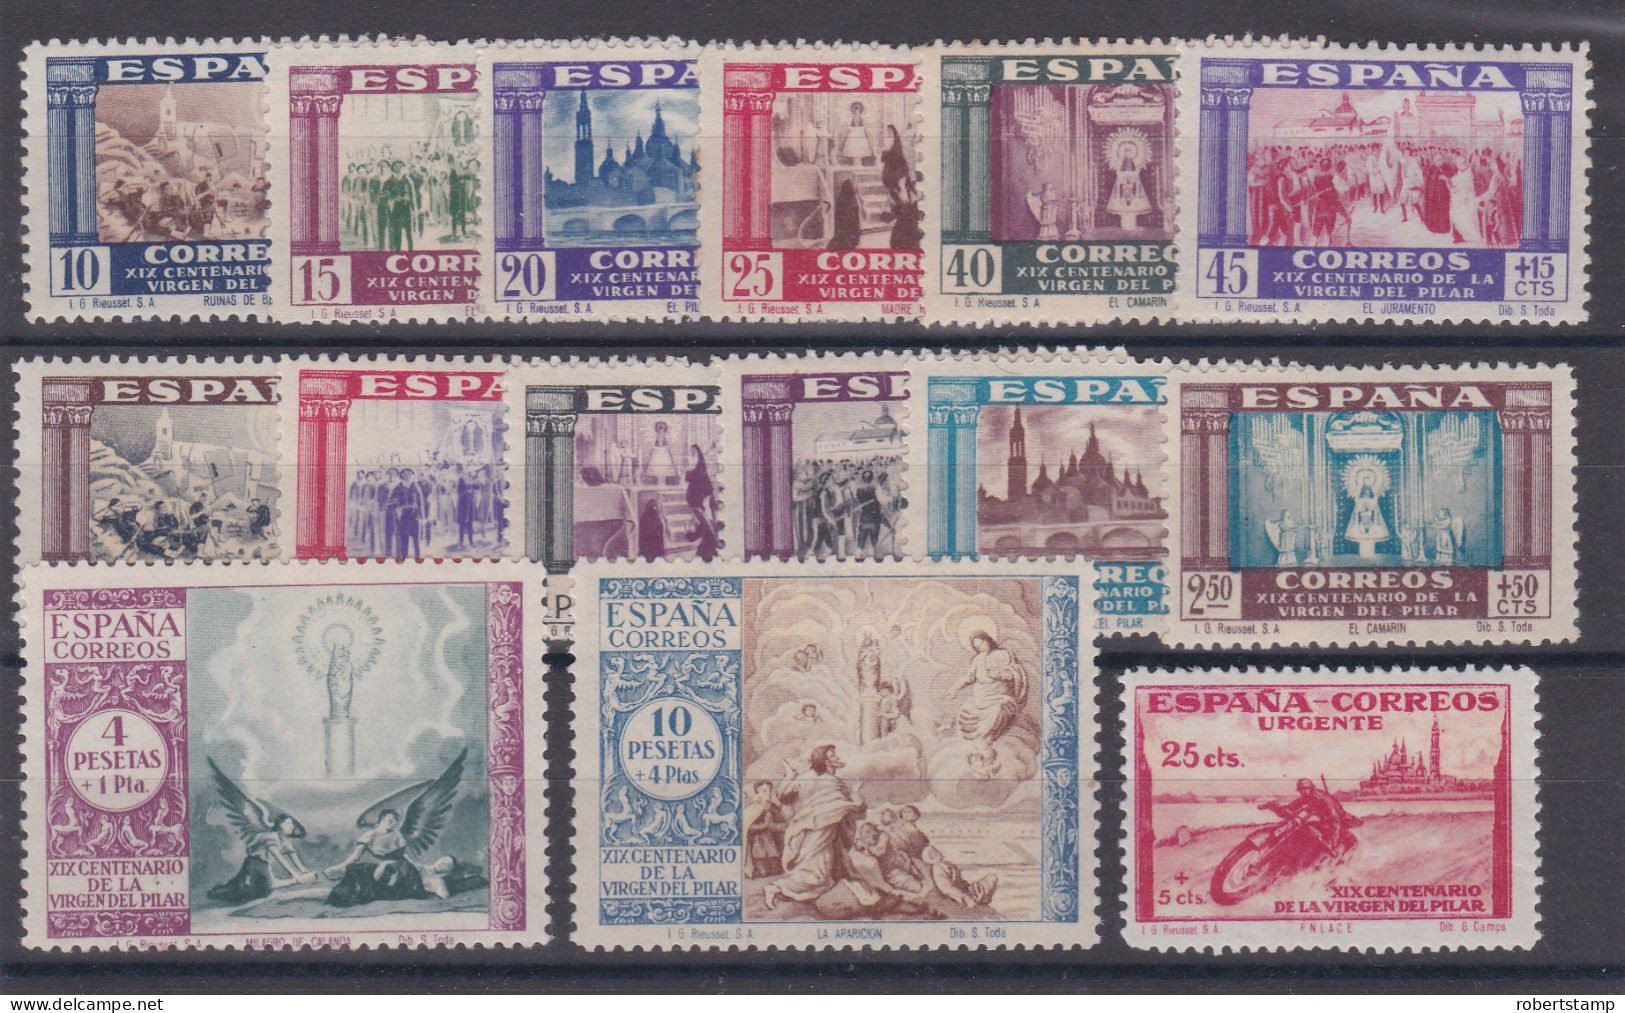 ESPAÑA 1940 - The 1900th Anniversary Of The Appearance Of The Virgin Of Pillar Edifil 889/903* -MLH- - Unused Stamps